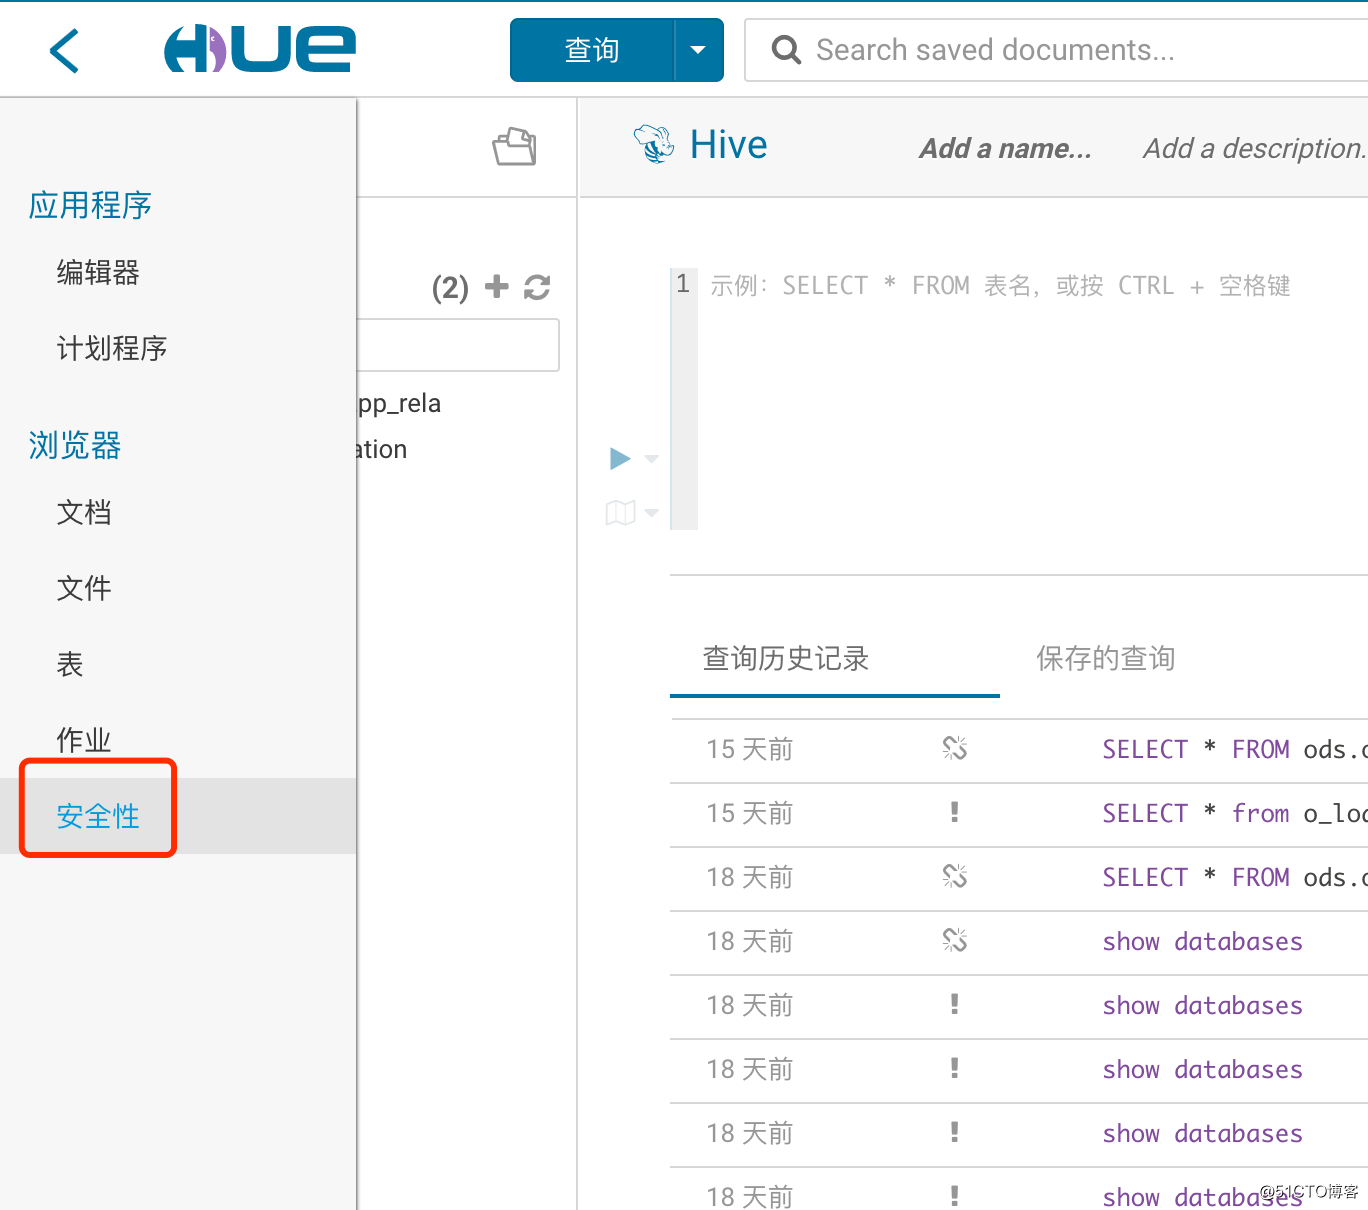 How to use Sentry to create a role in Hue, authorization